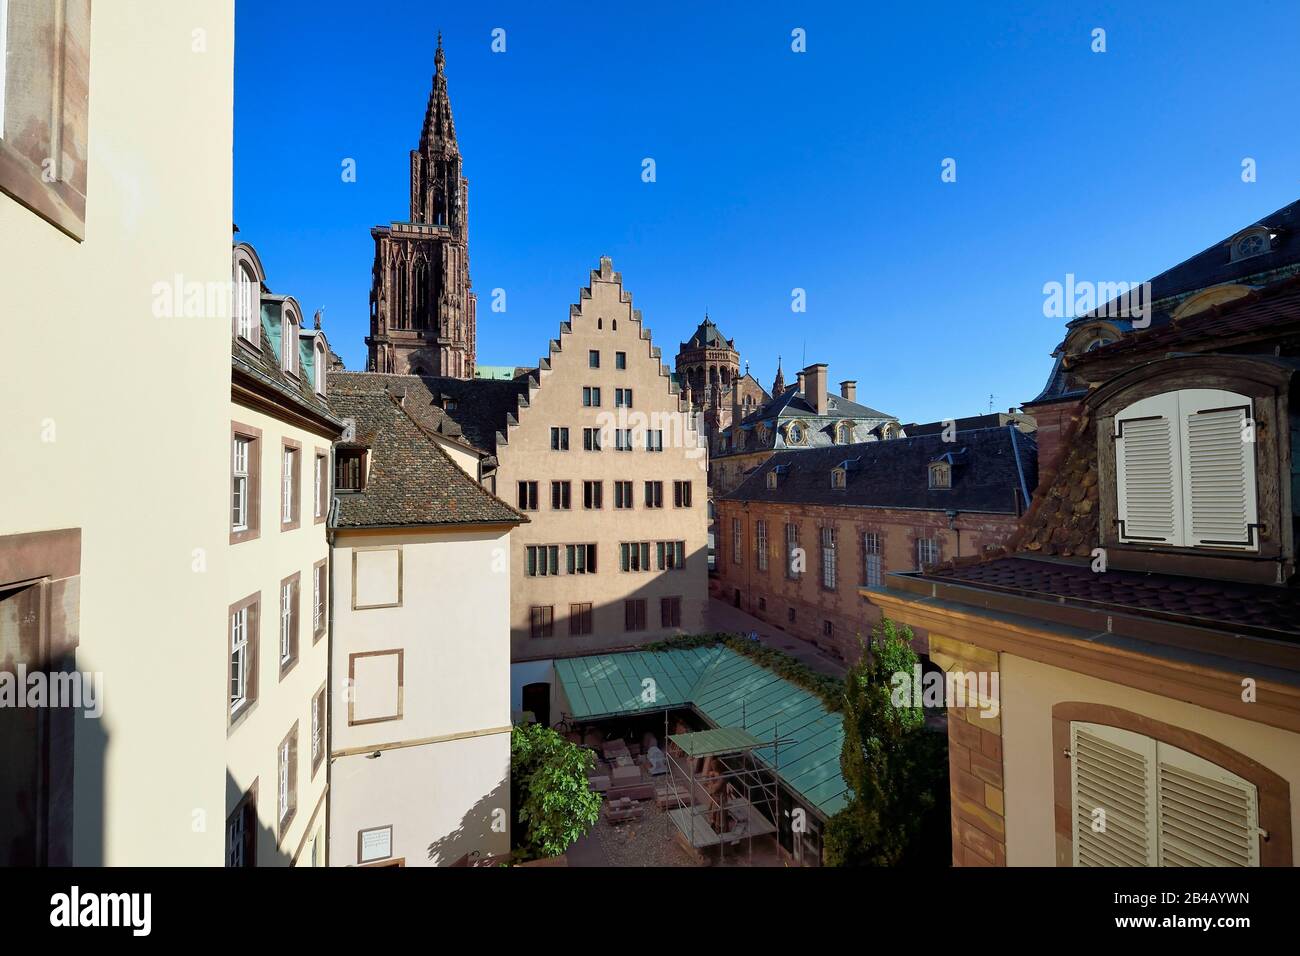 France, Bas Rhin, Strasbourg, old town listed as World Heritage by UNESCO, Notre Dame Cathedral behind the buildings of the Fondation de l'Oeuvre Notre-Dame with crow-stepped gable Stock Photo